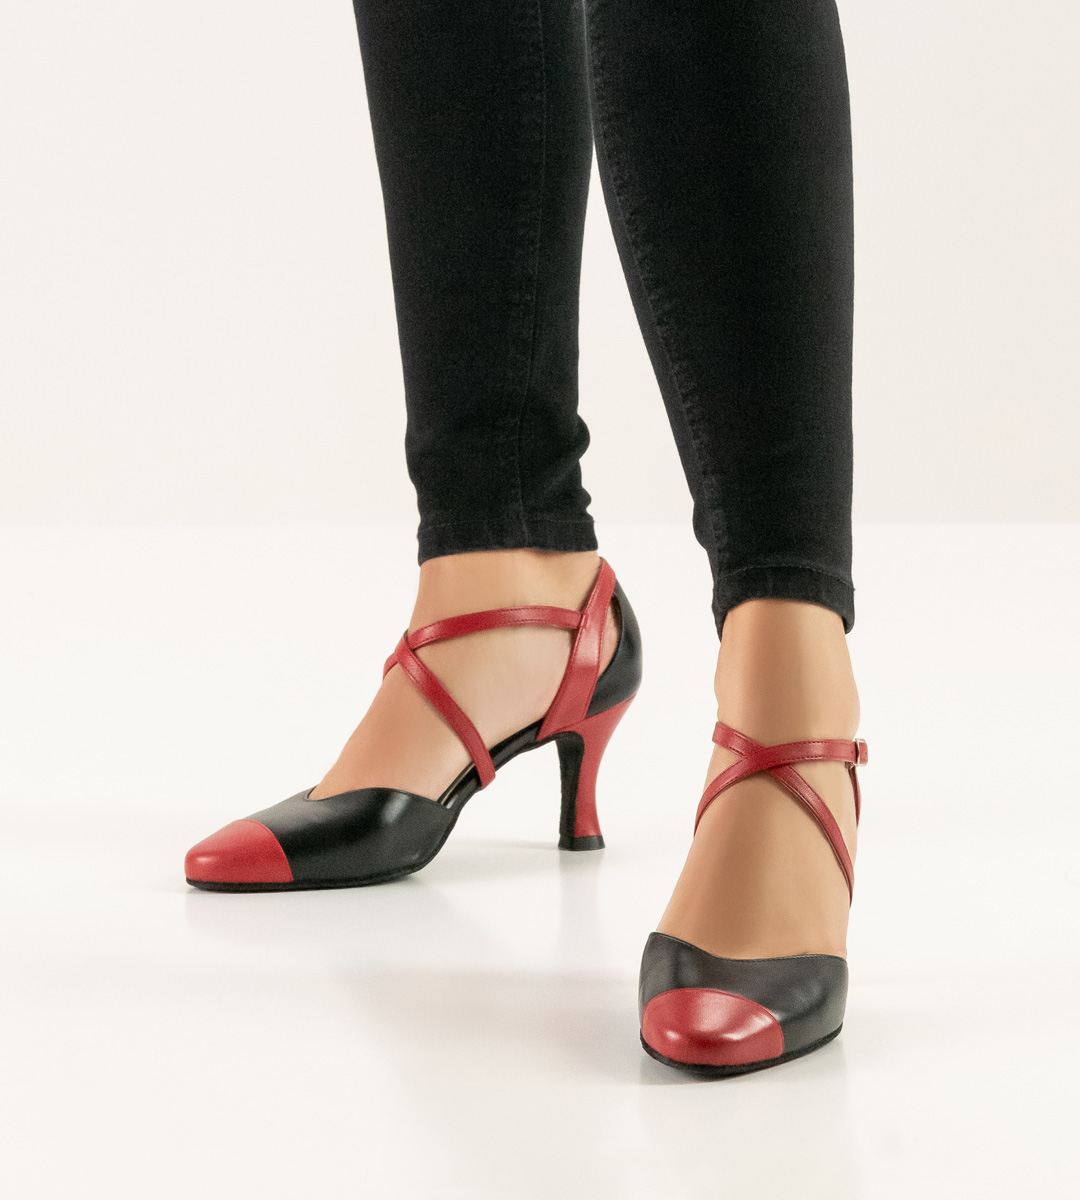 Werner Kern ladies' dance shoe with 6.5 cm heel height in combination with black trousers